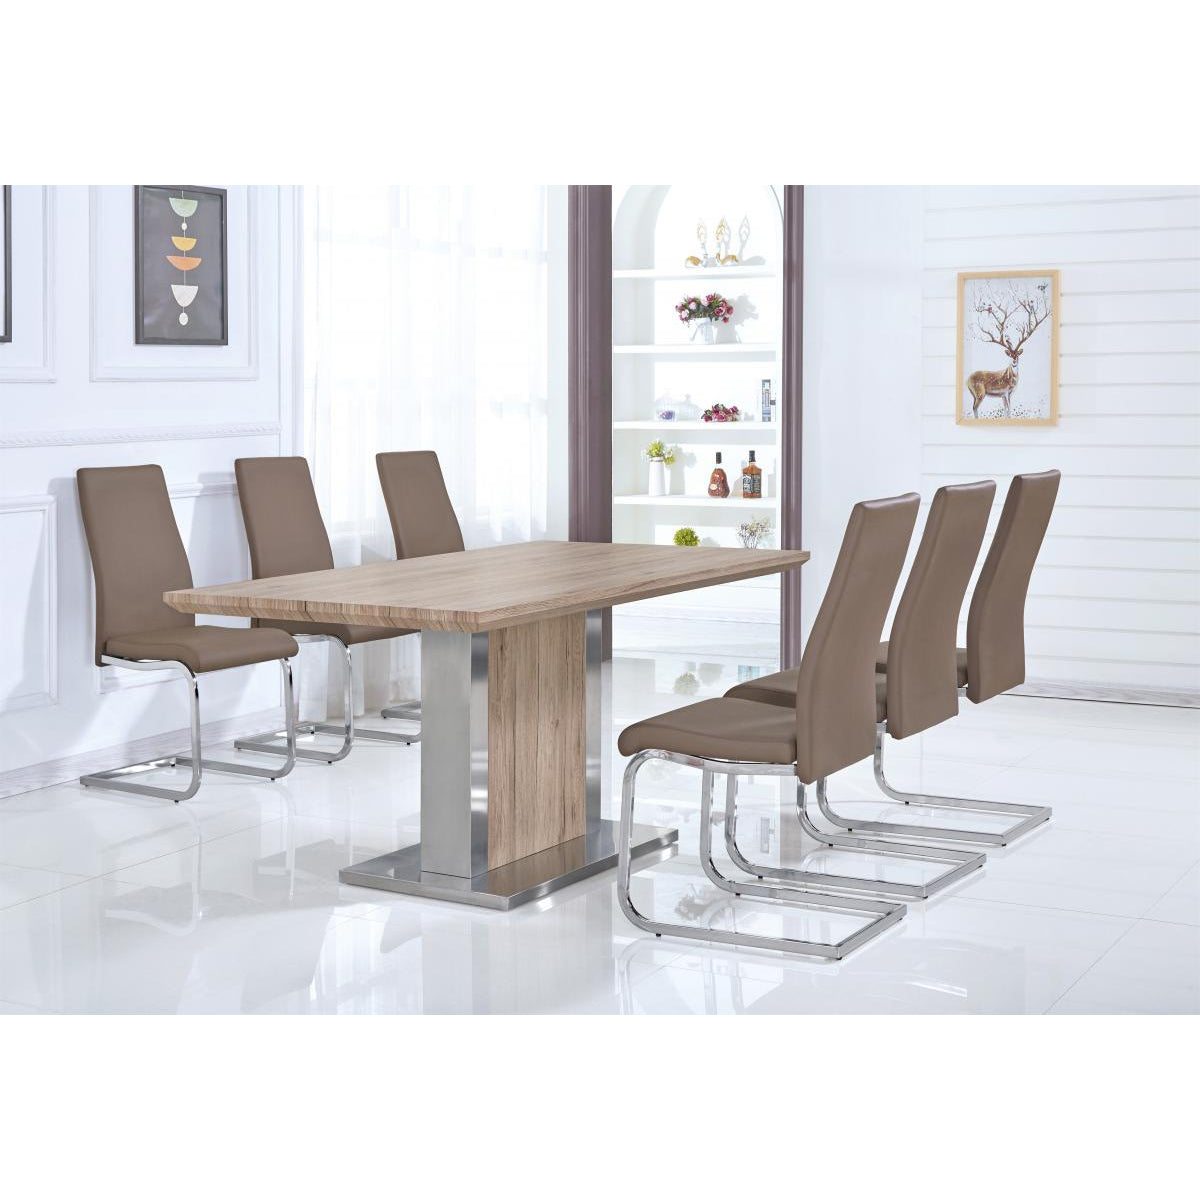 Belize Dining Table Natural And Stainless Steel